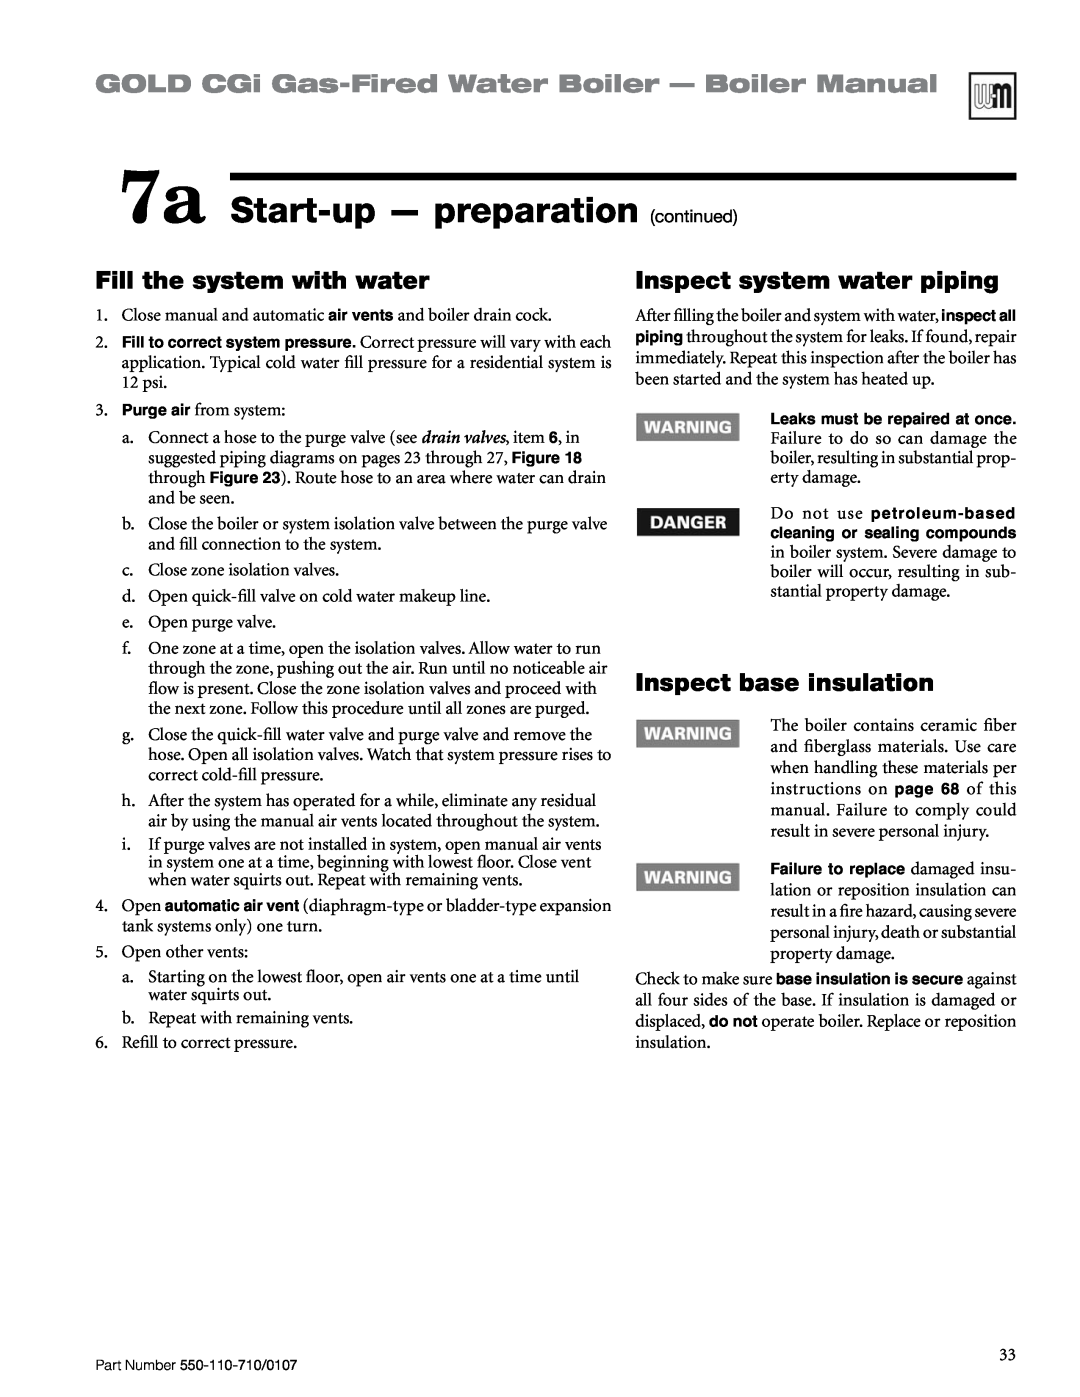 Weil-McLain Series 2 manual 7a Start-up— preparation continued, GOLD CGi Gas-FiredWater Boiler — Boiler Manual 